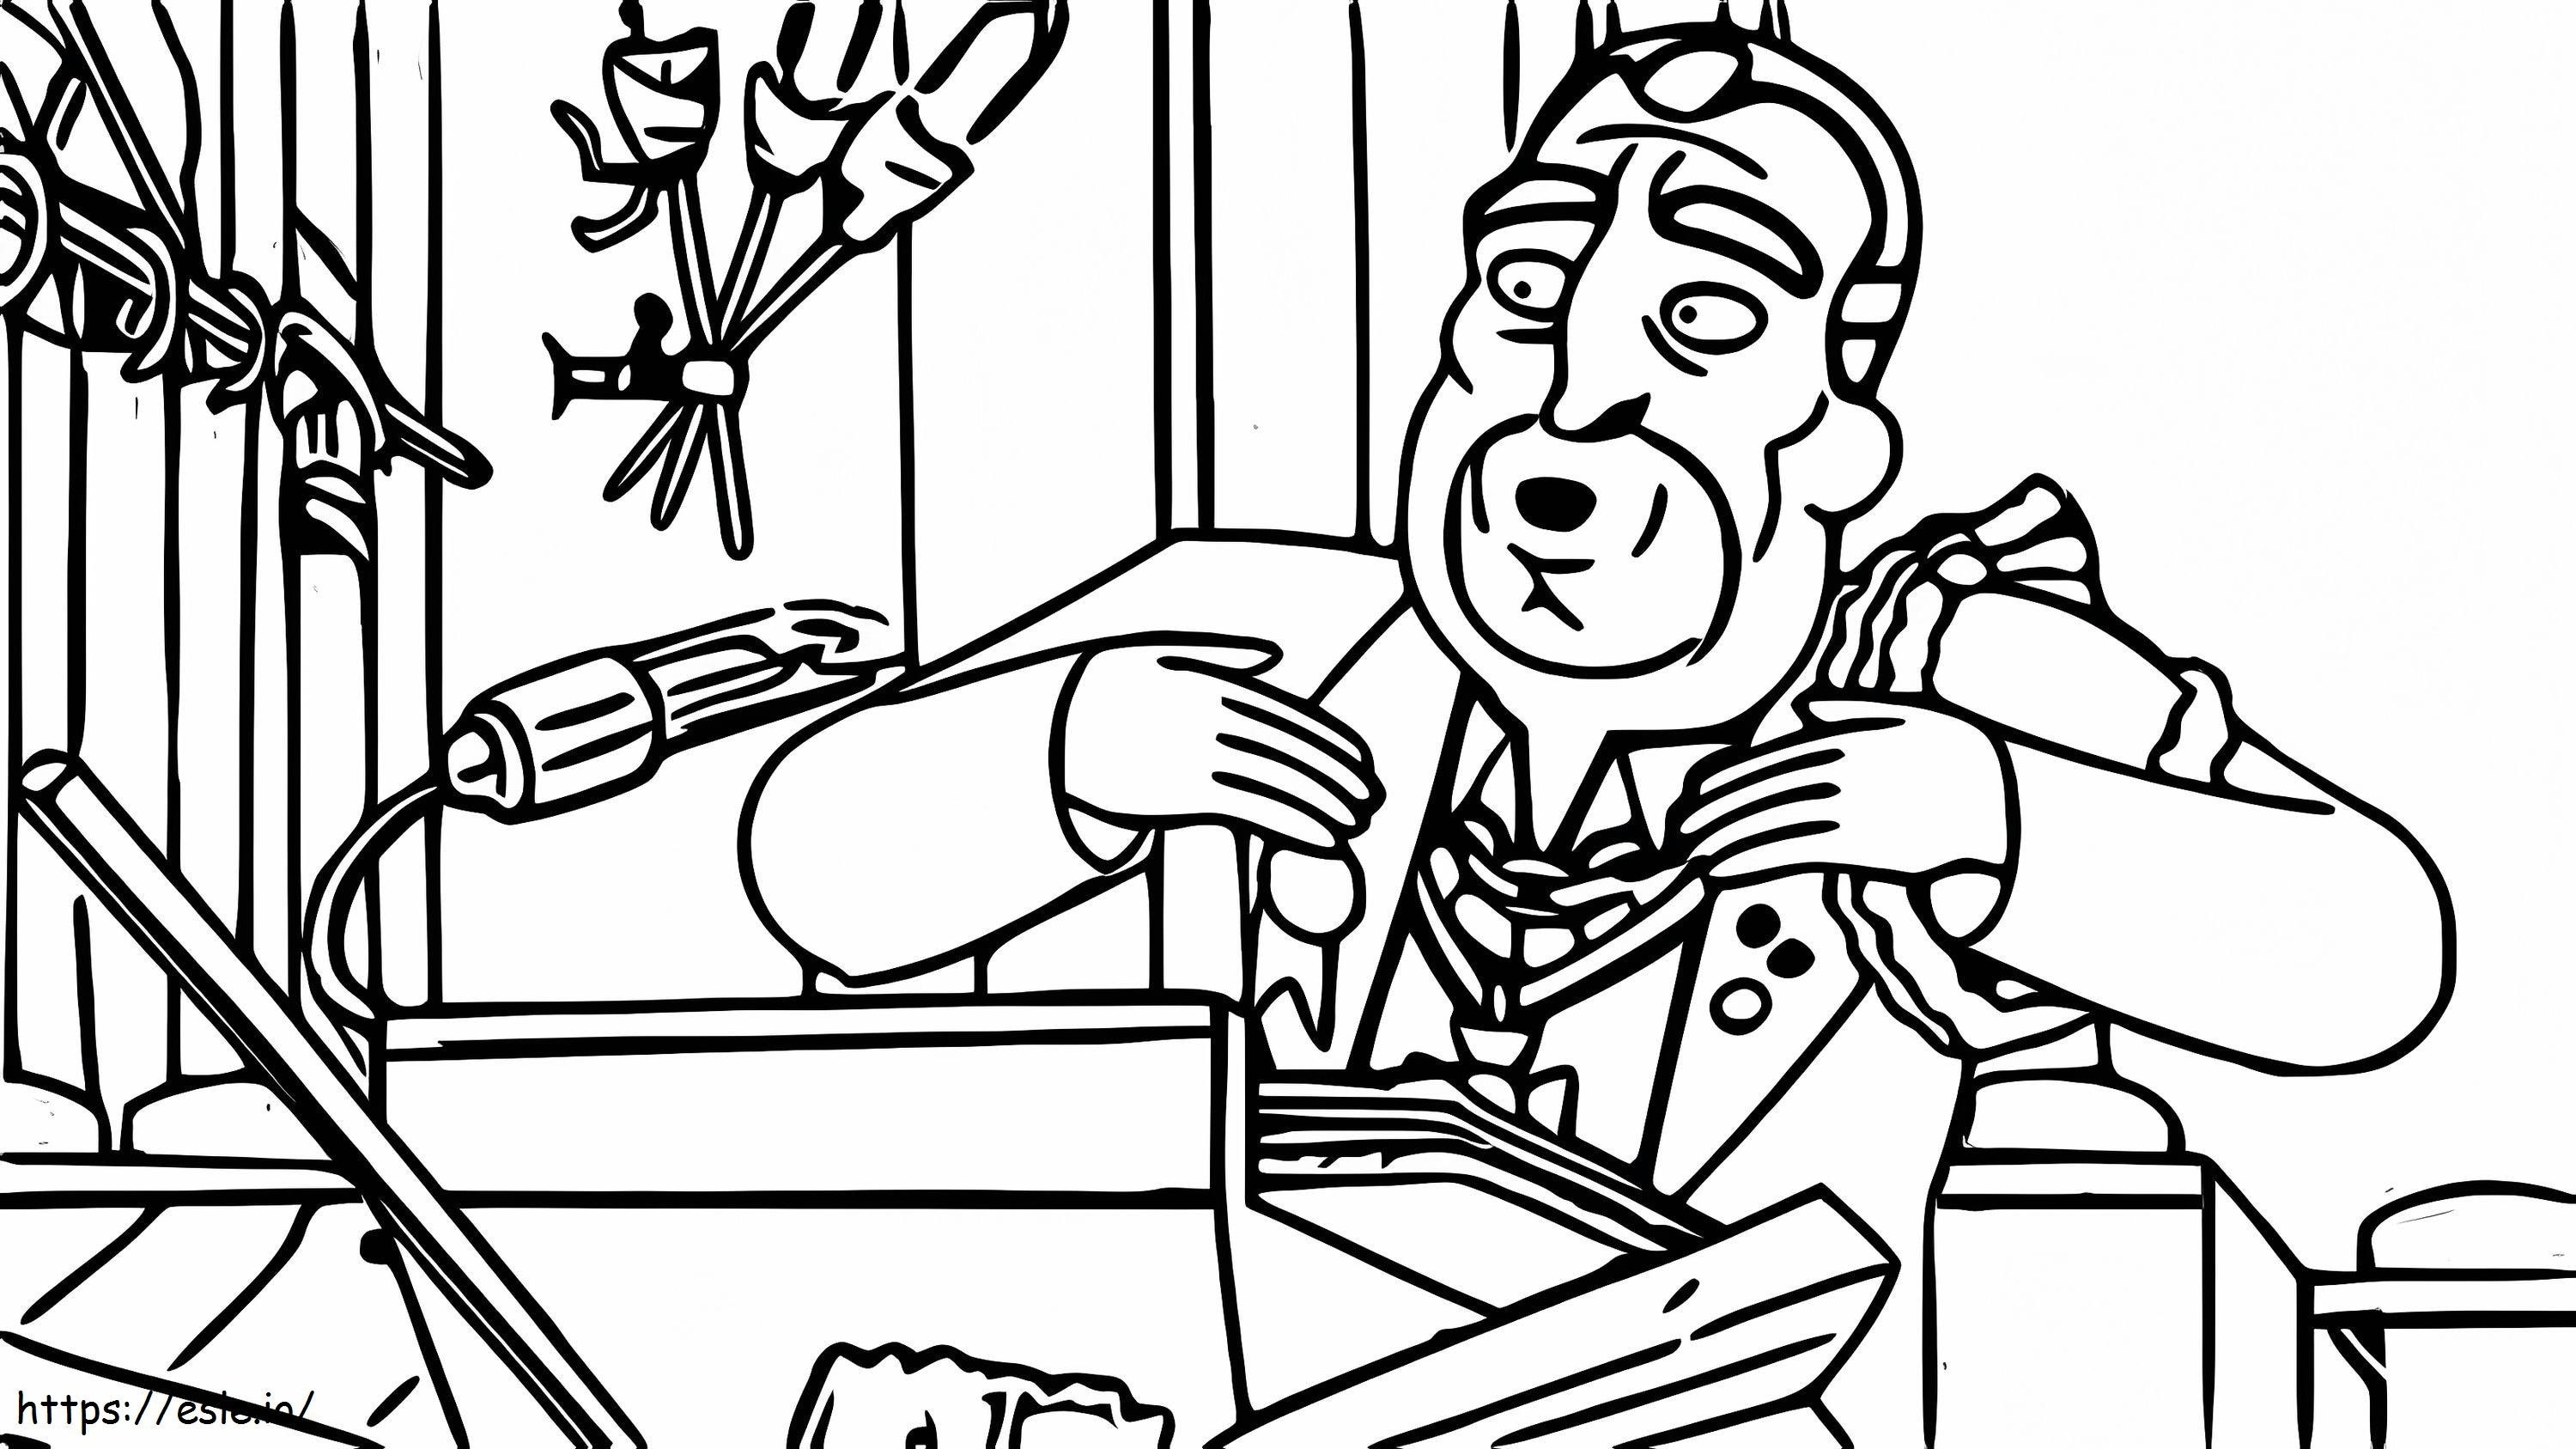 The Duke From Solar Opposites coloring page